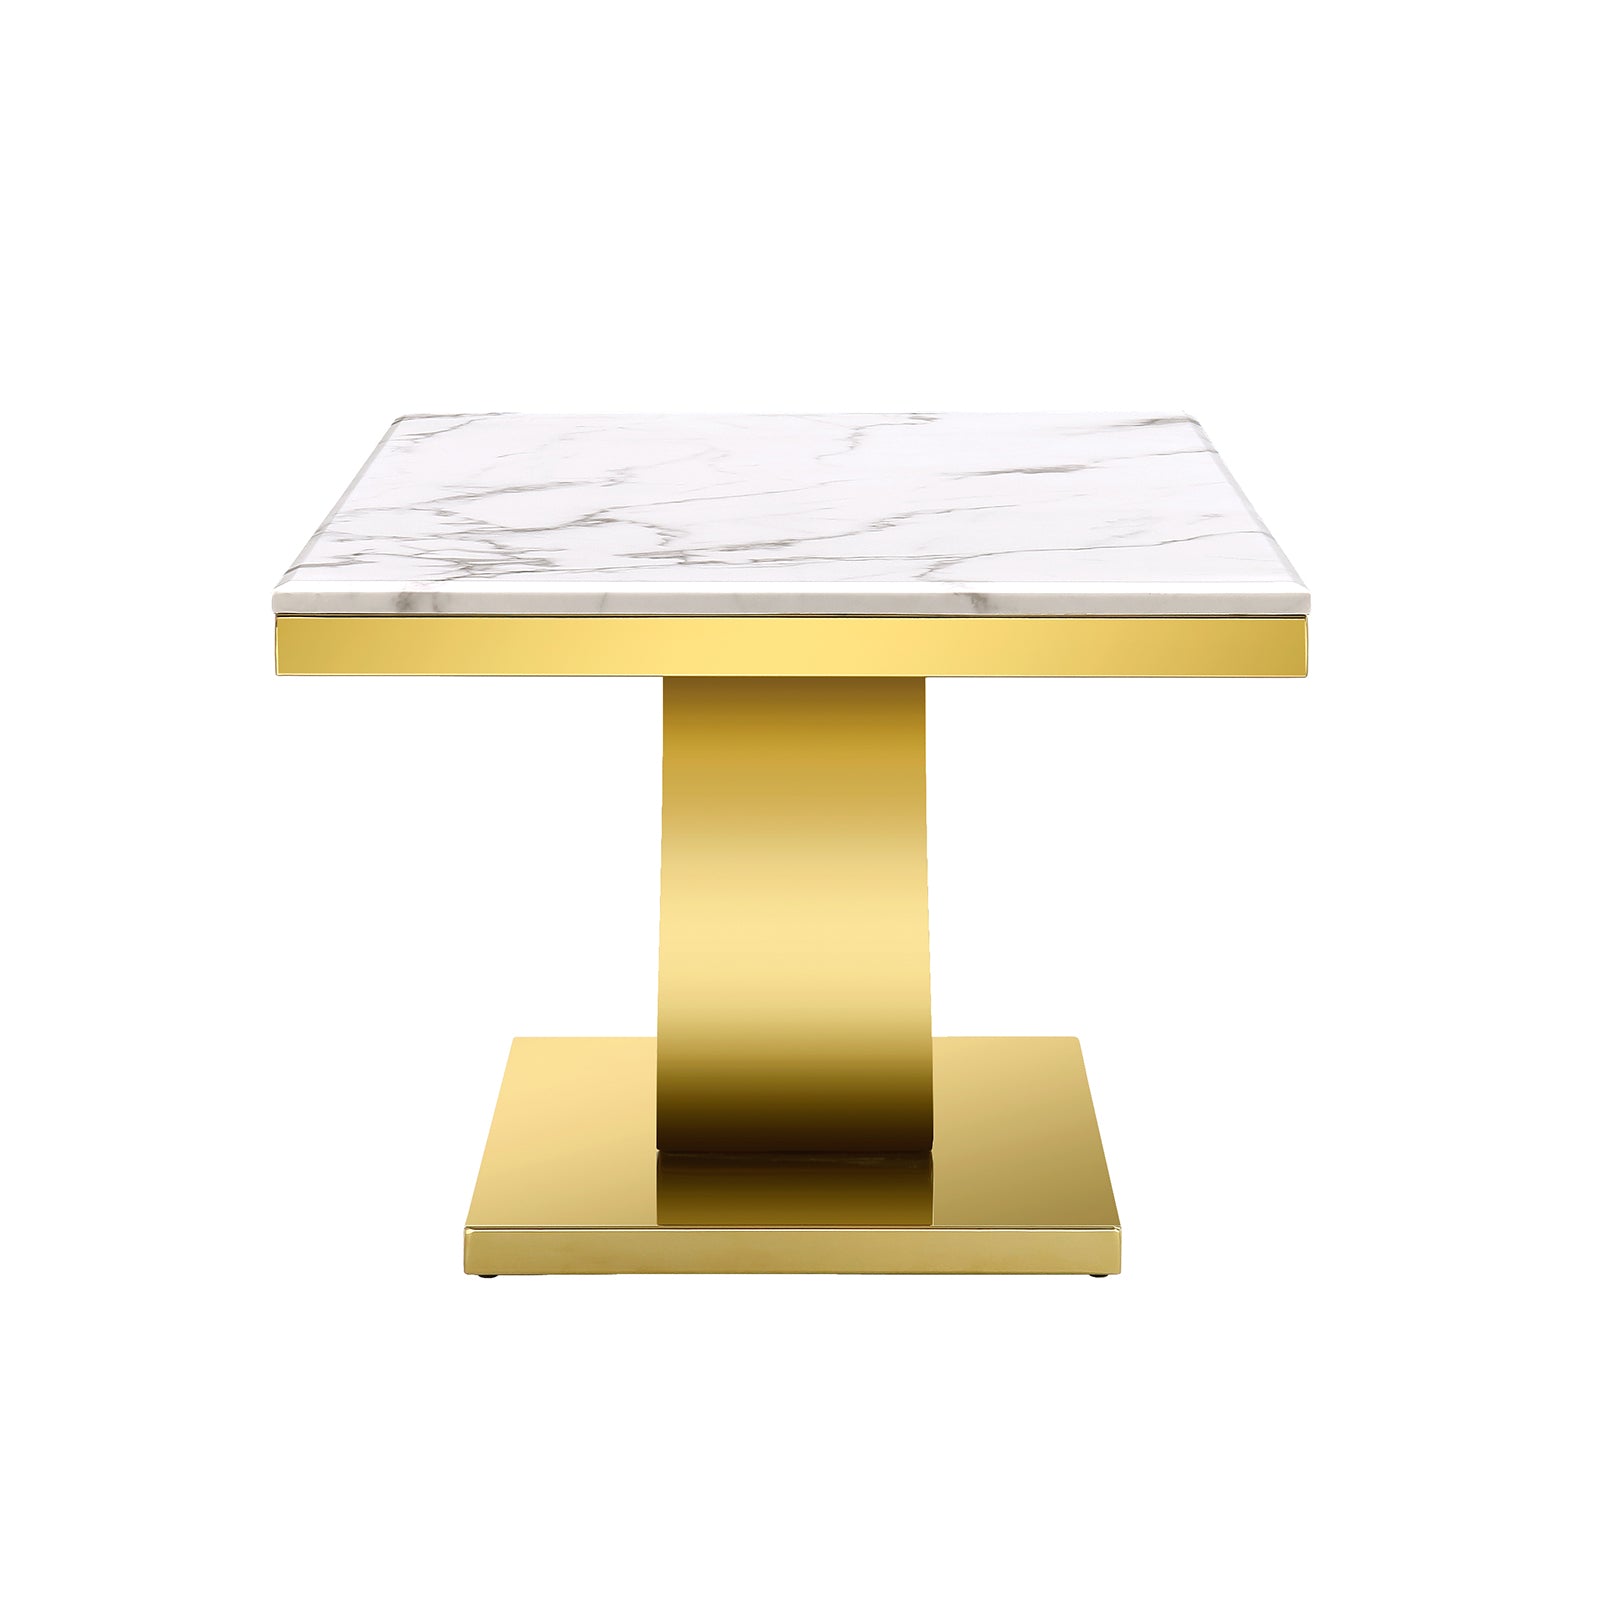 White Coffee Table with Gold Metal U Base | F314